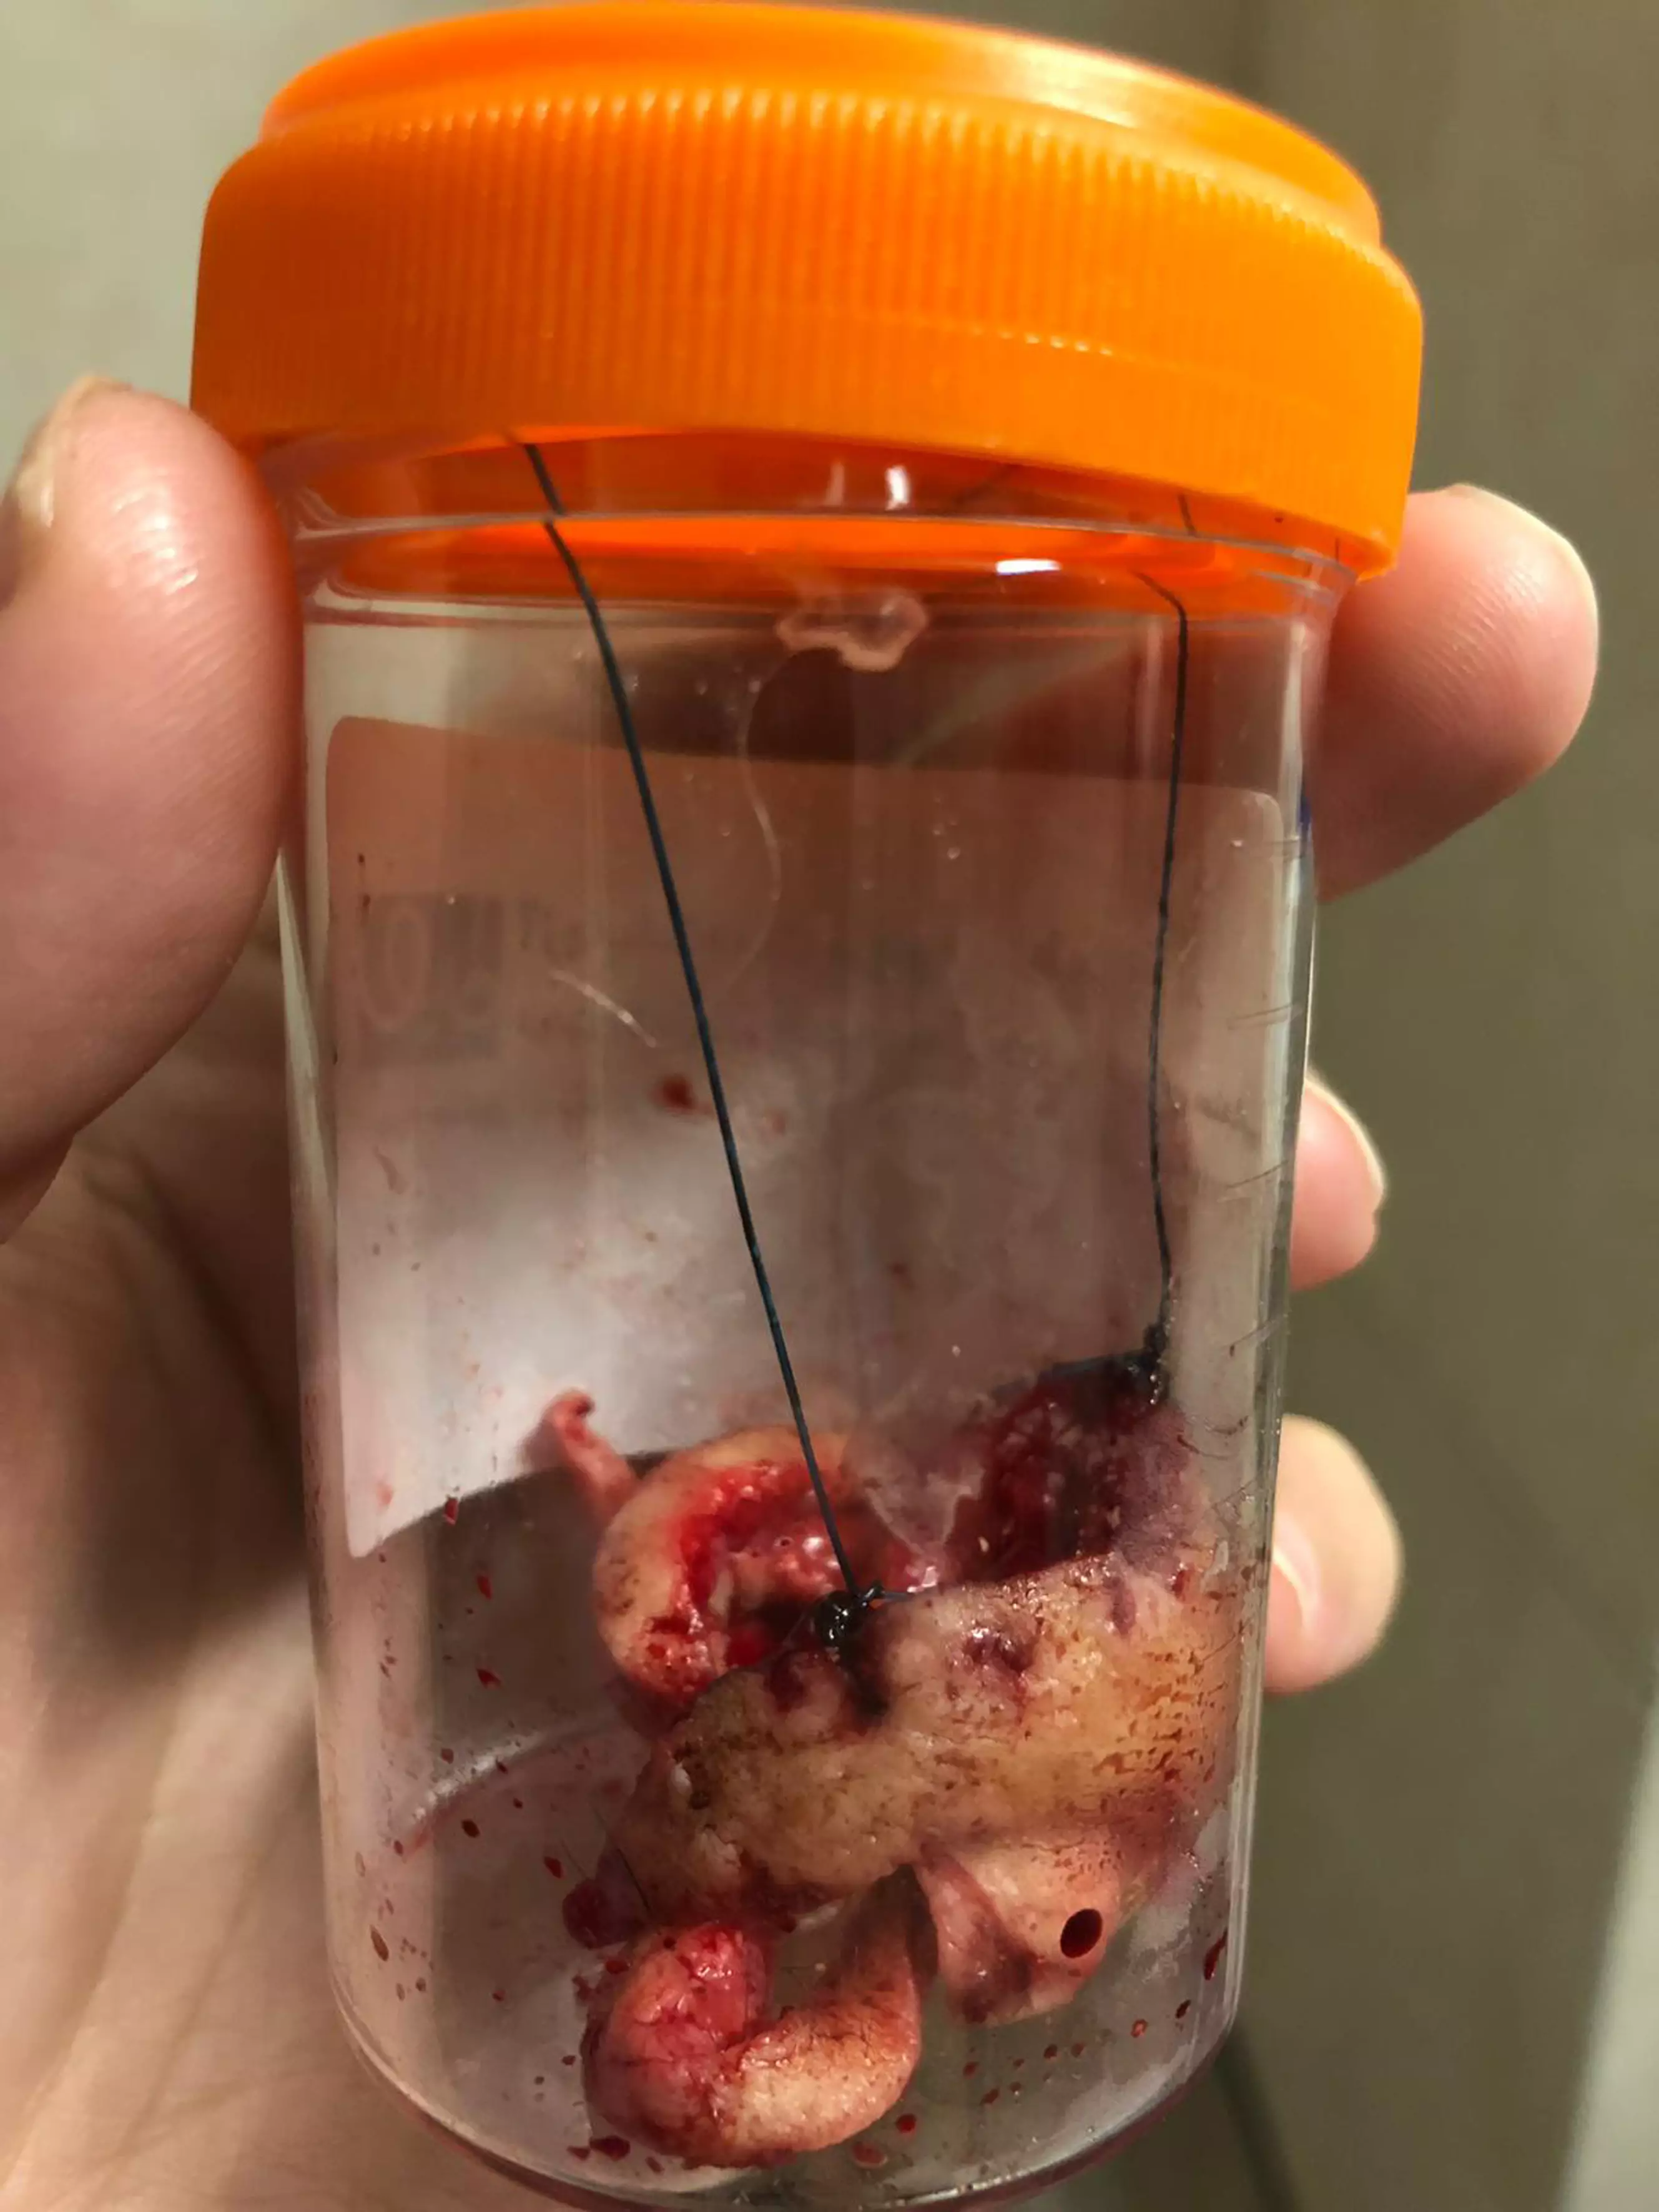 5cm of skin was removed, shown here, along with 200 dissolvable threads and fibrosis.